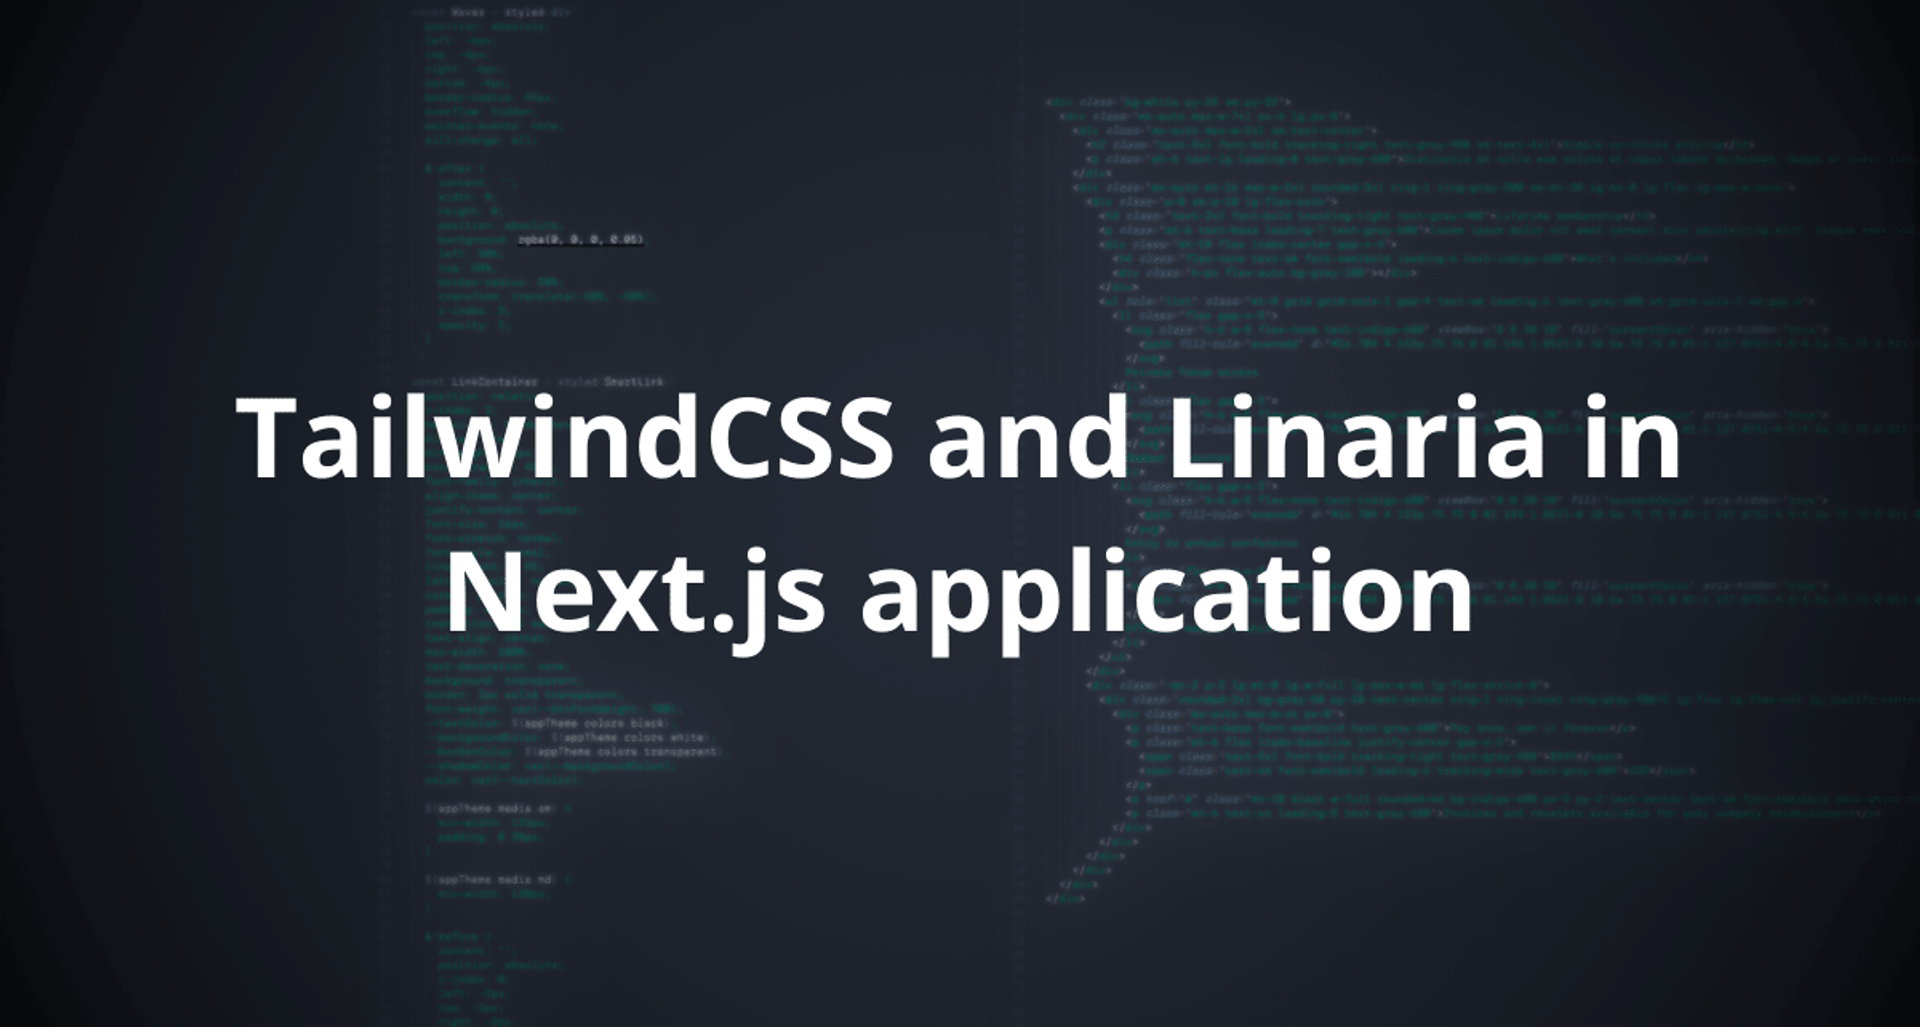 Beyond the Basics: Exploring TailwindCSS and Linaria in Next.js - From Installation to Performance Optimization